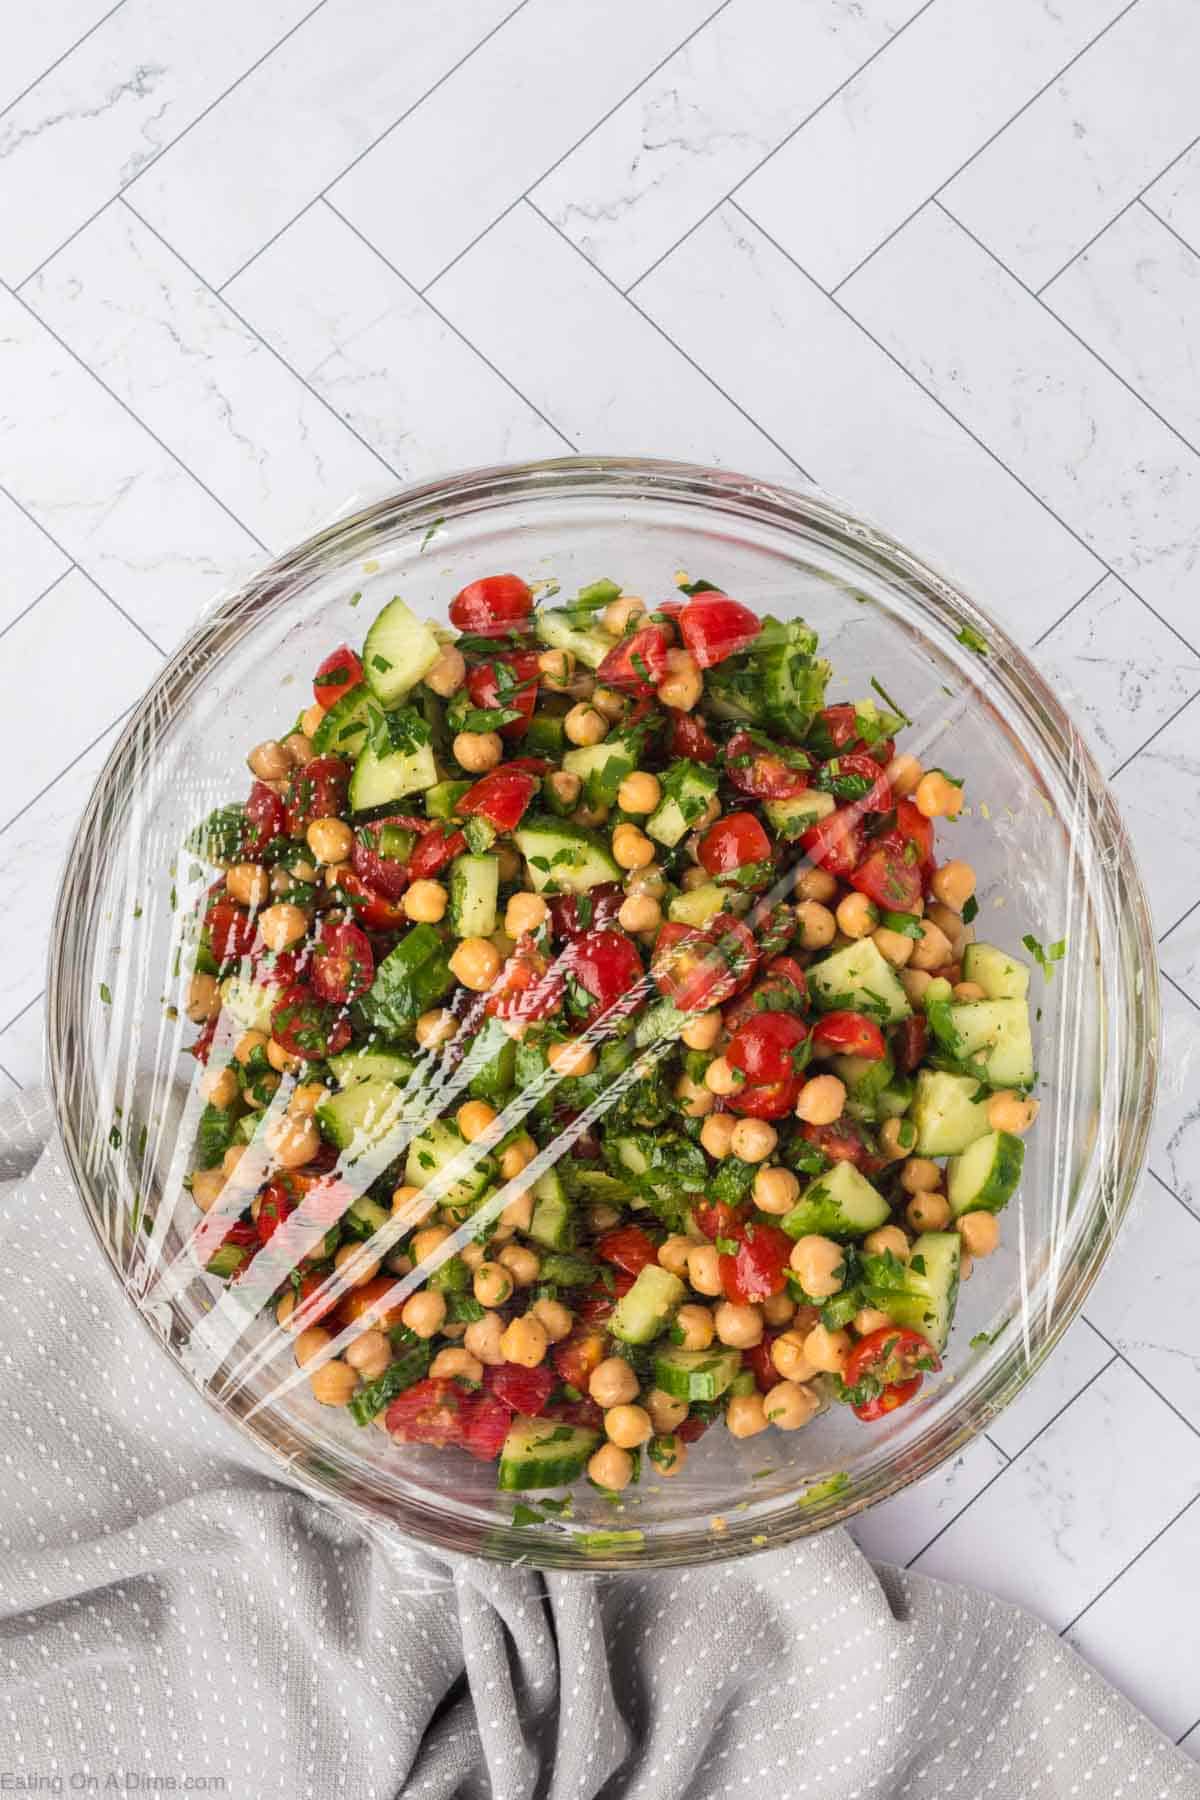 Combine the dressing ingredients in with the chickpea salad ingredients covered in a bowl